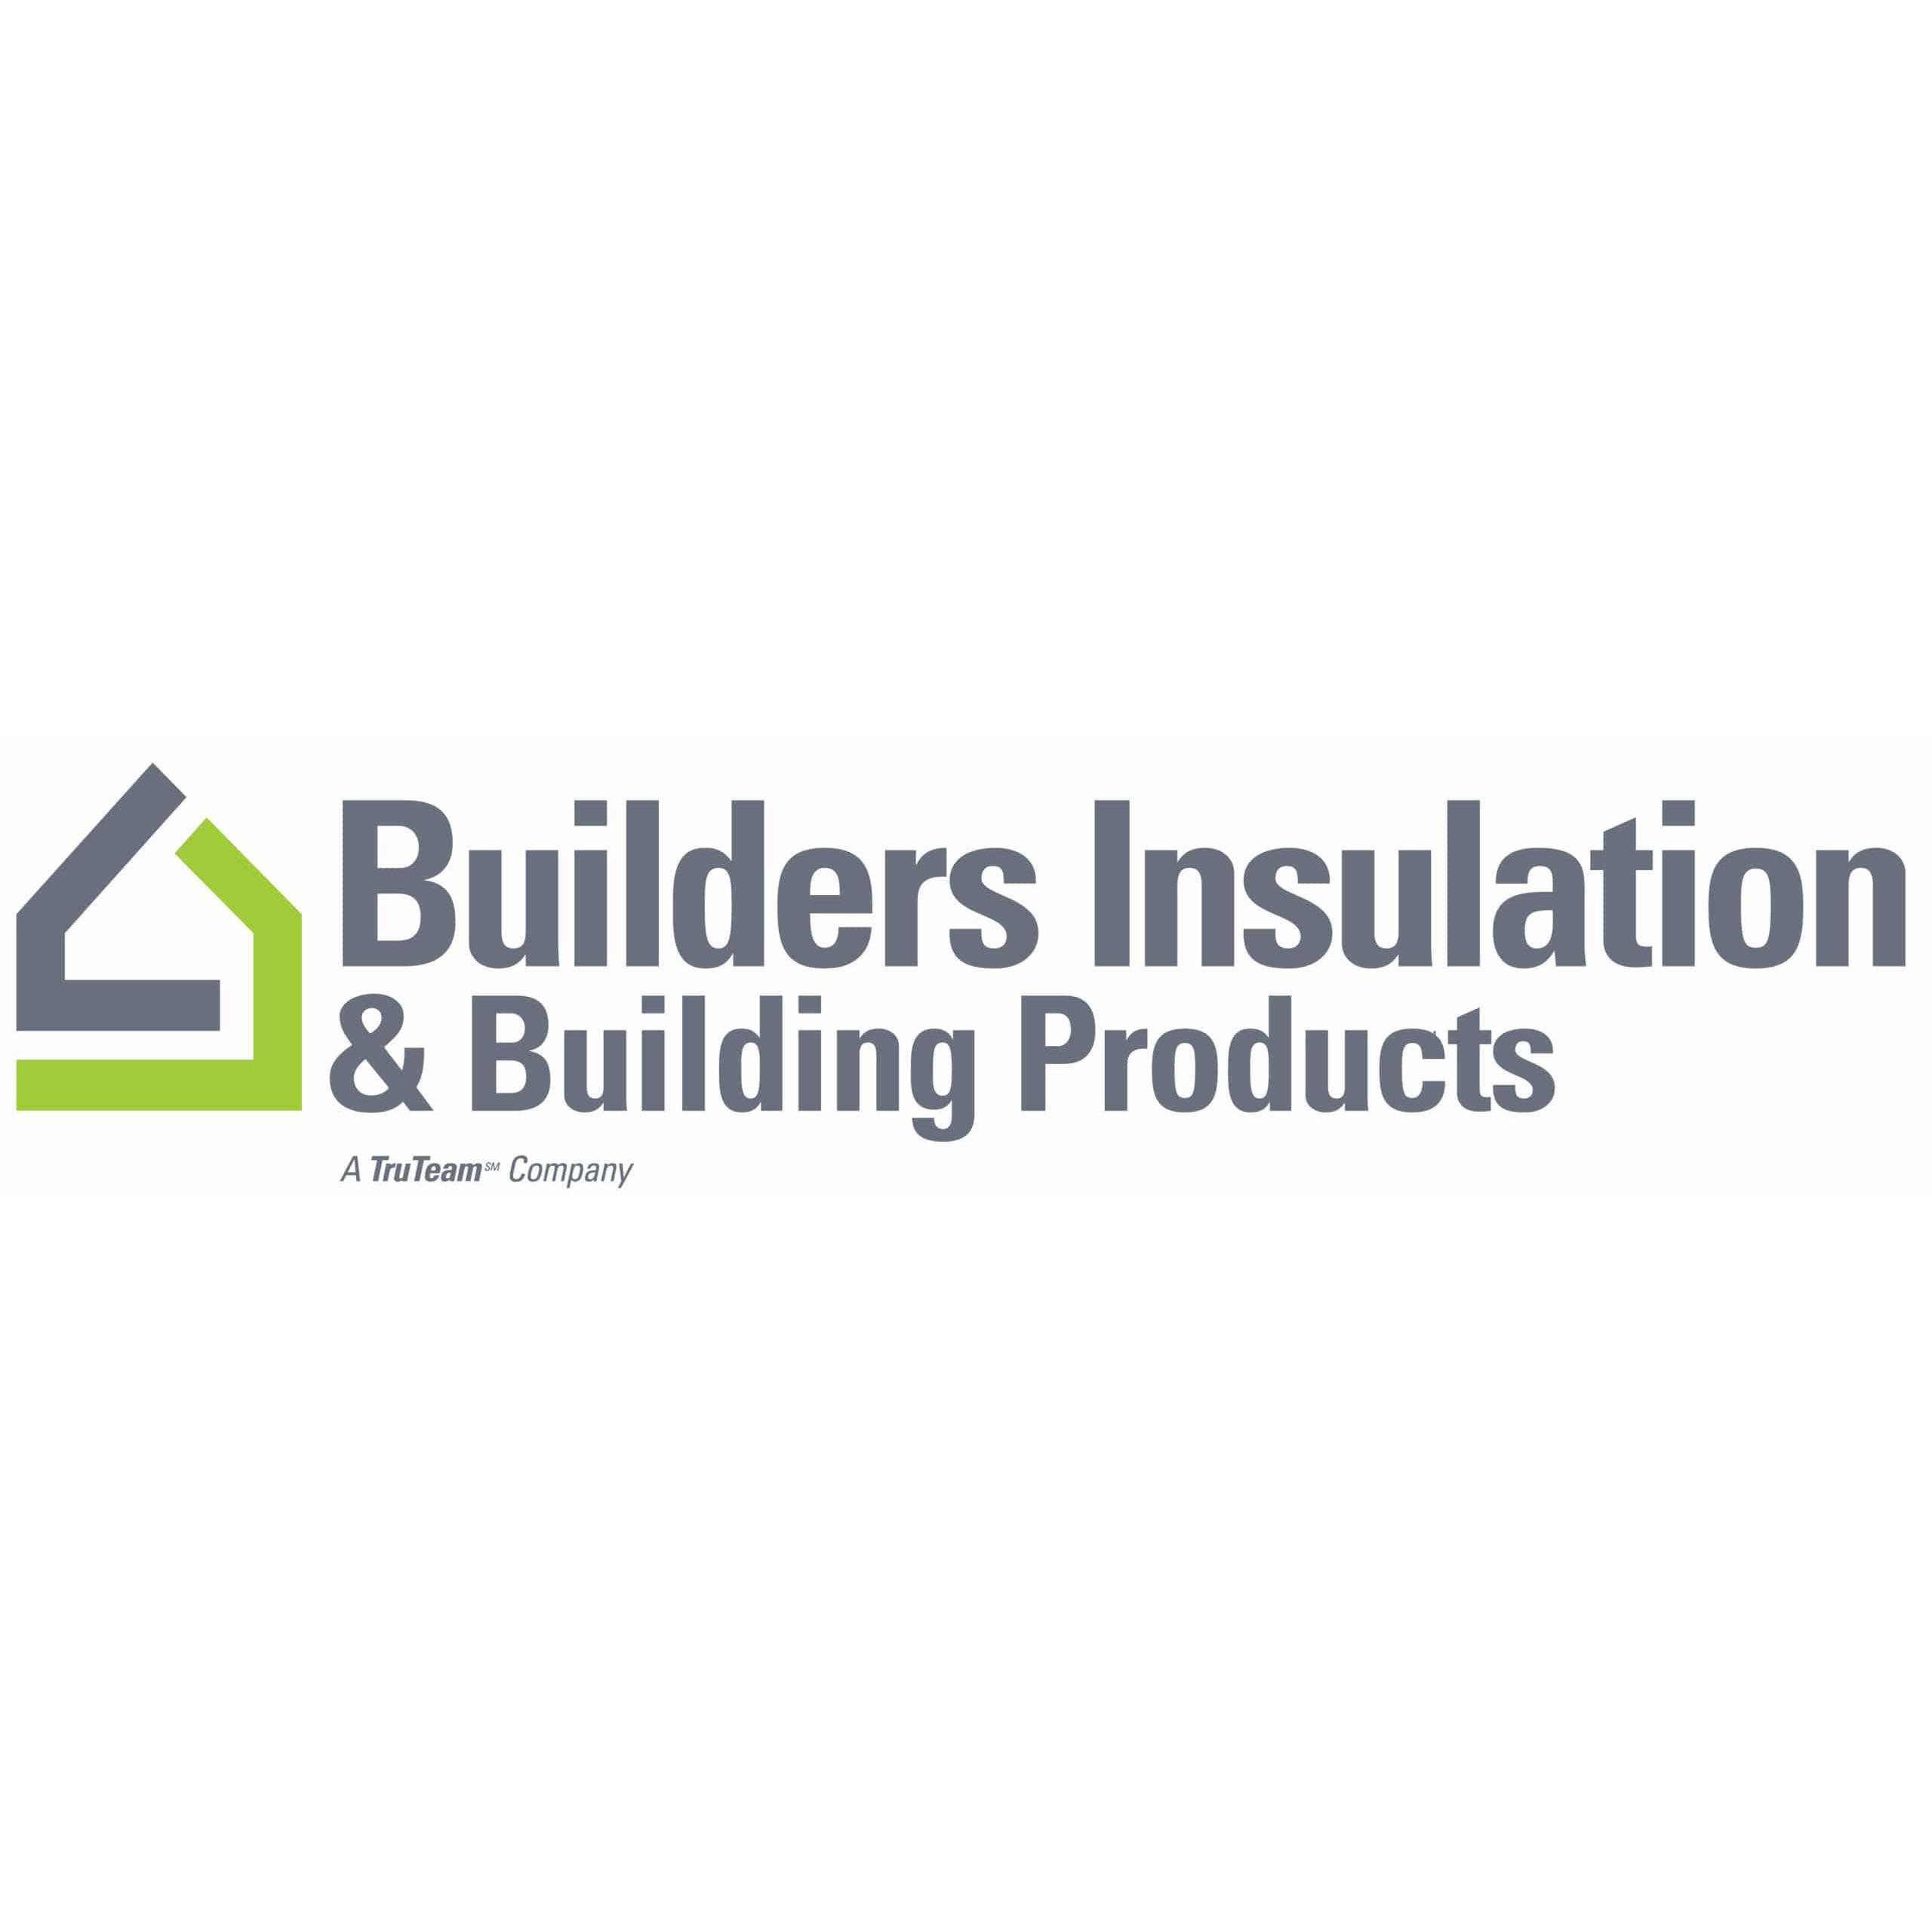 Builders Insulation & Building Products